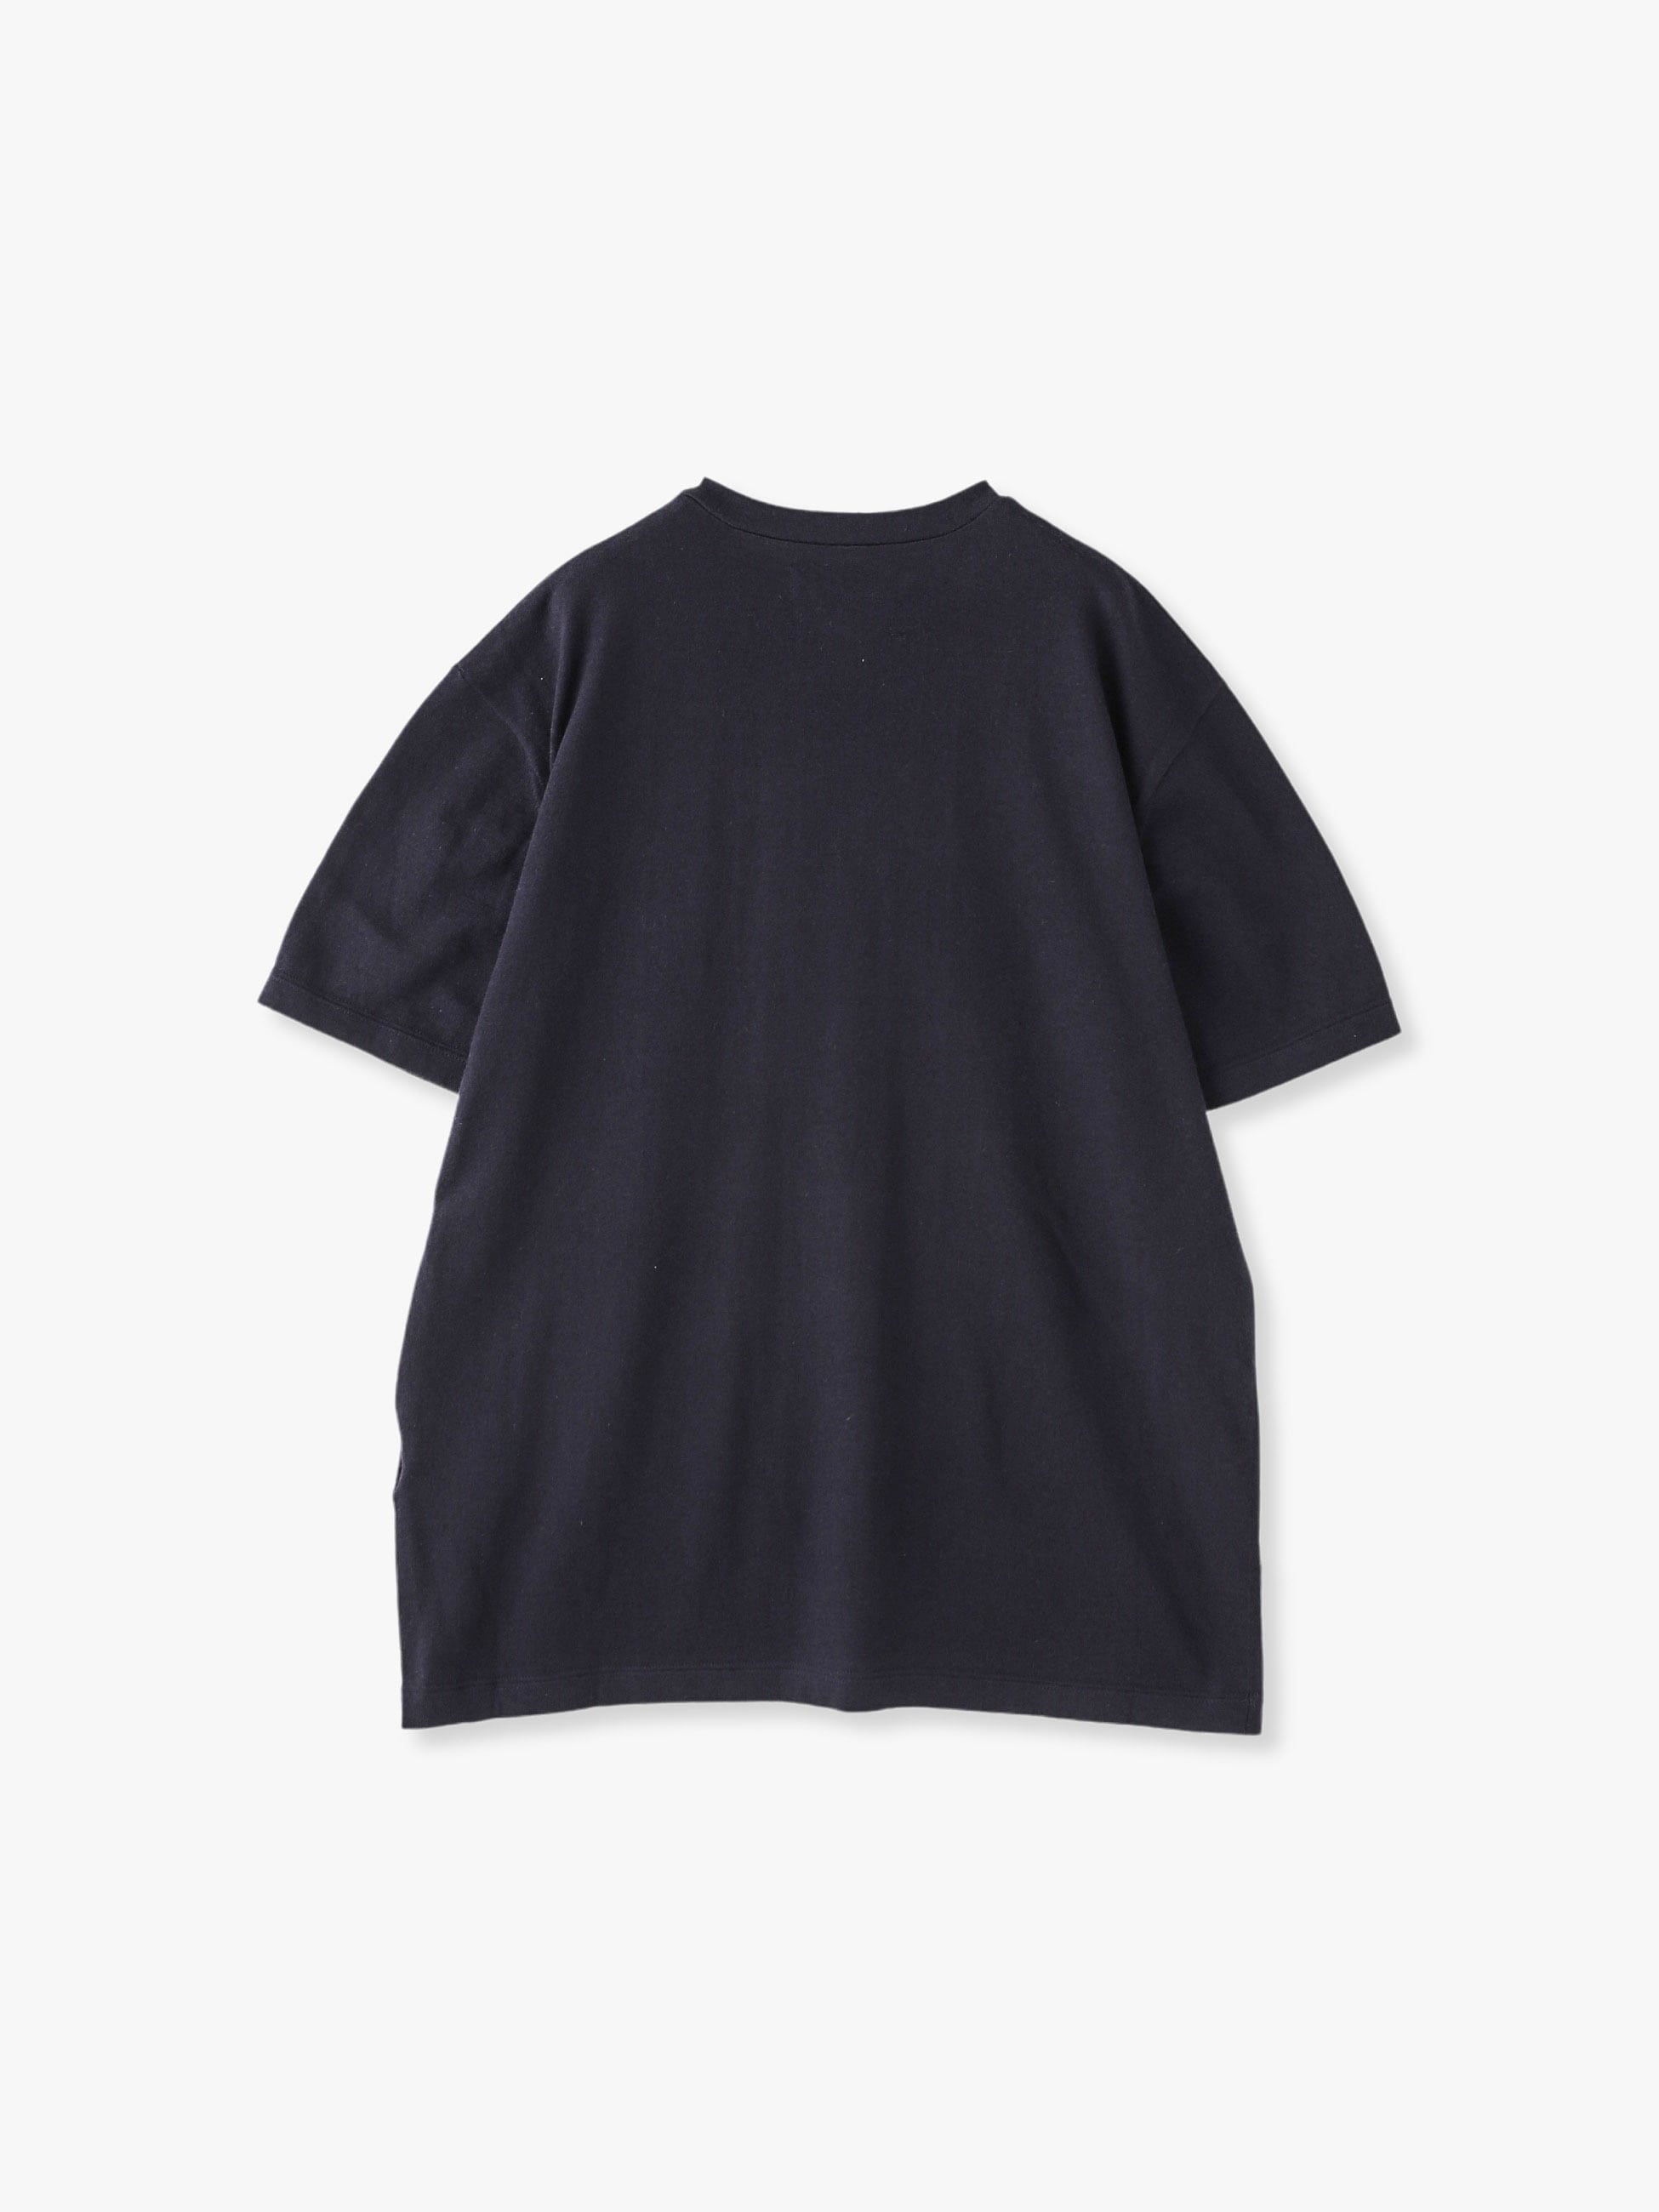 extreme cashmere Cotton Cashmere Teeレディース